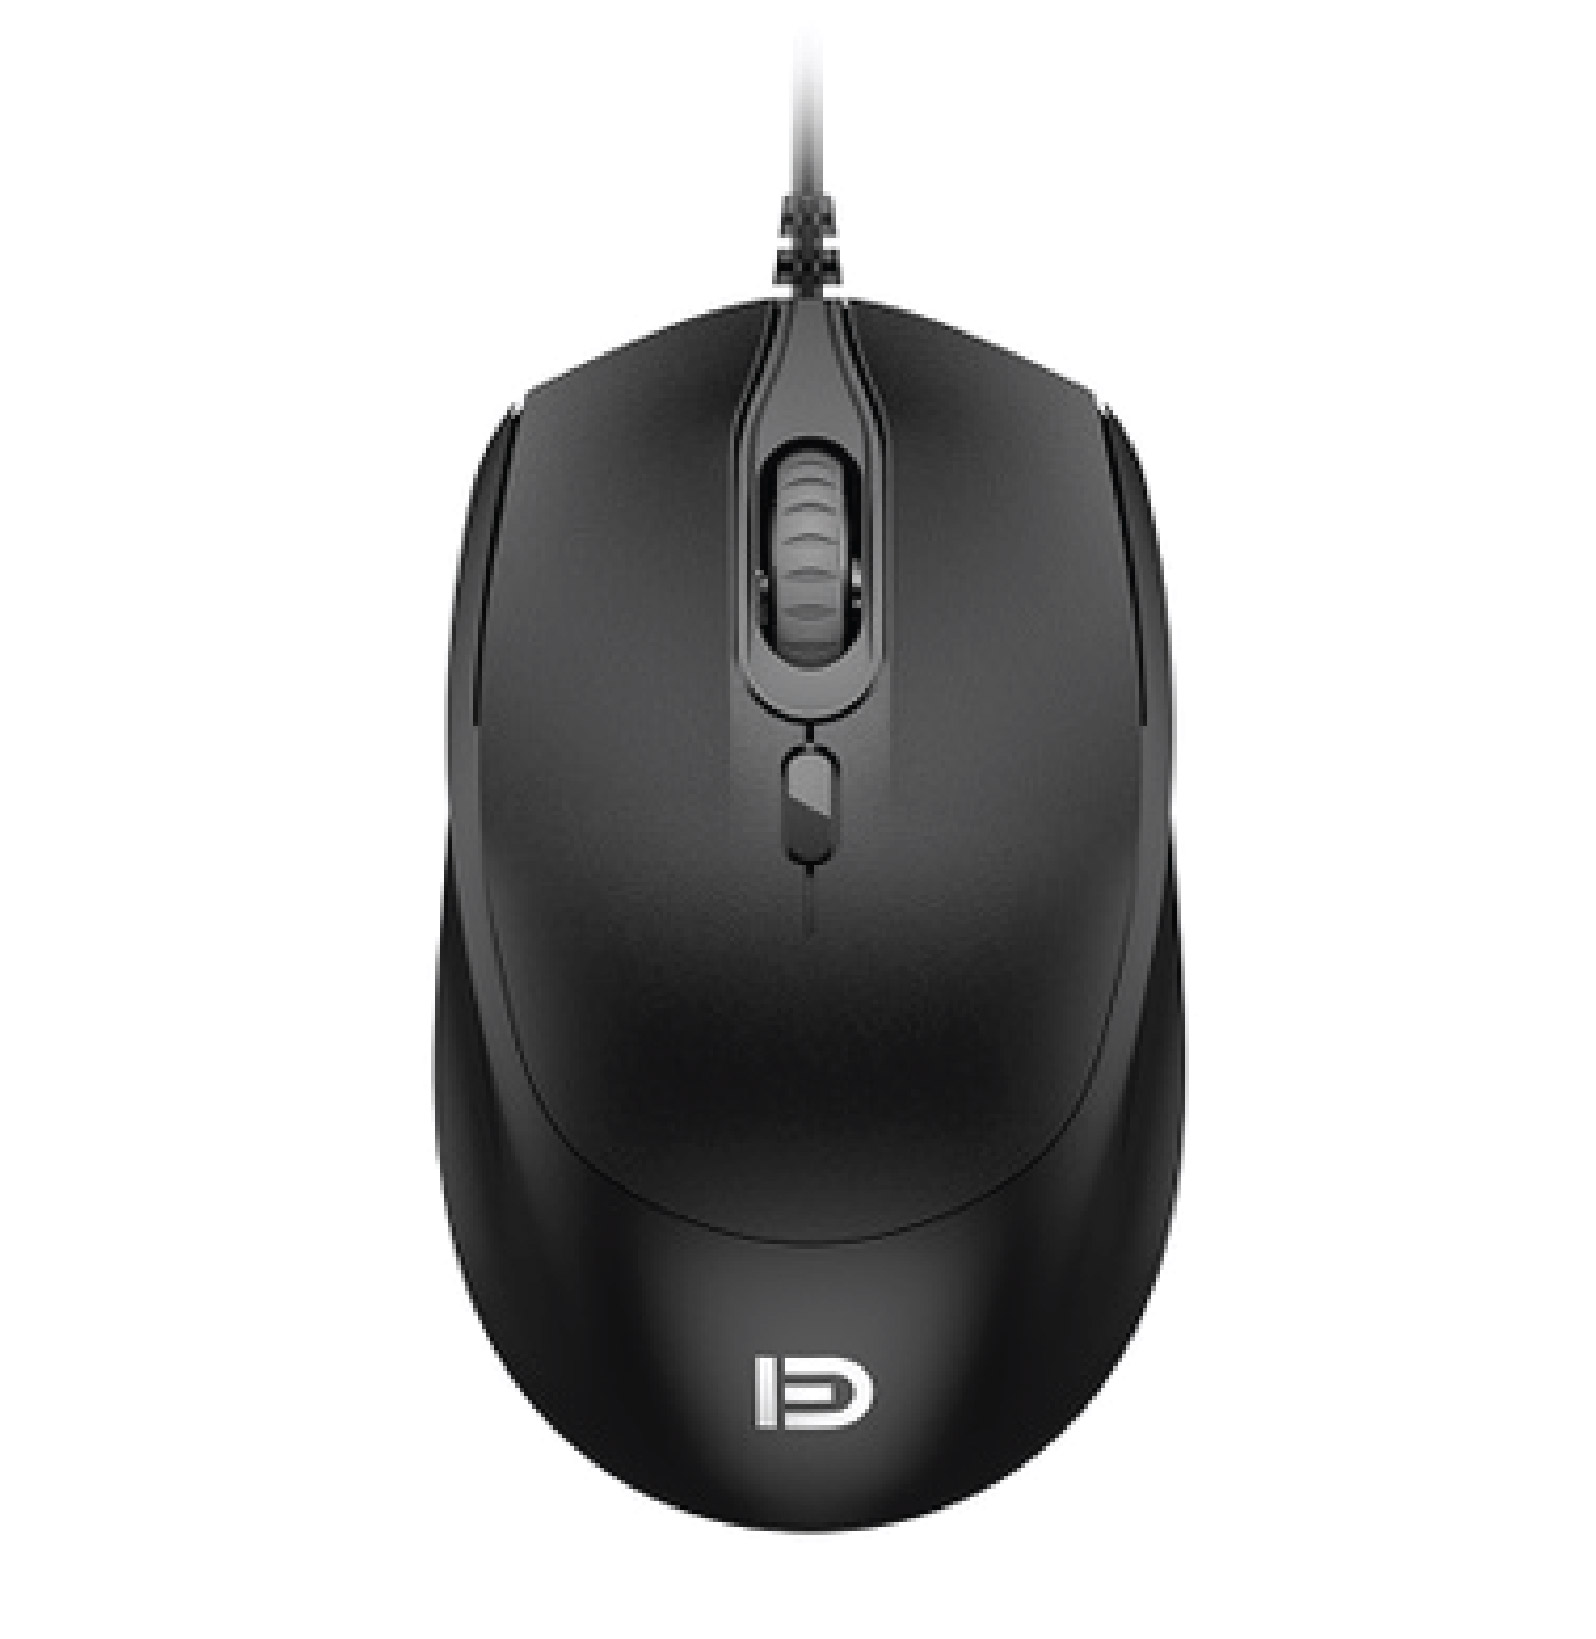 FD 3600N Mouse